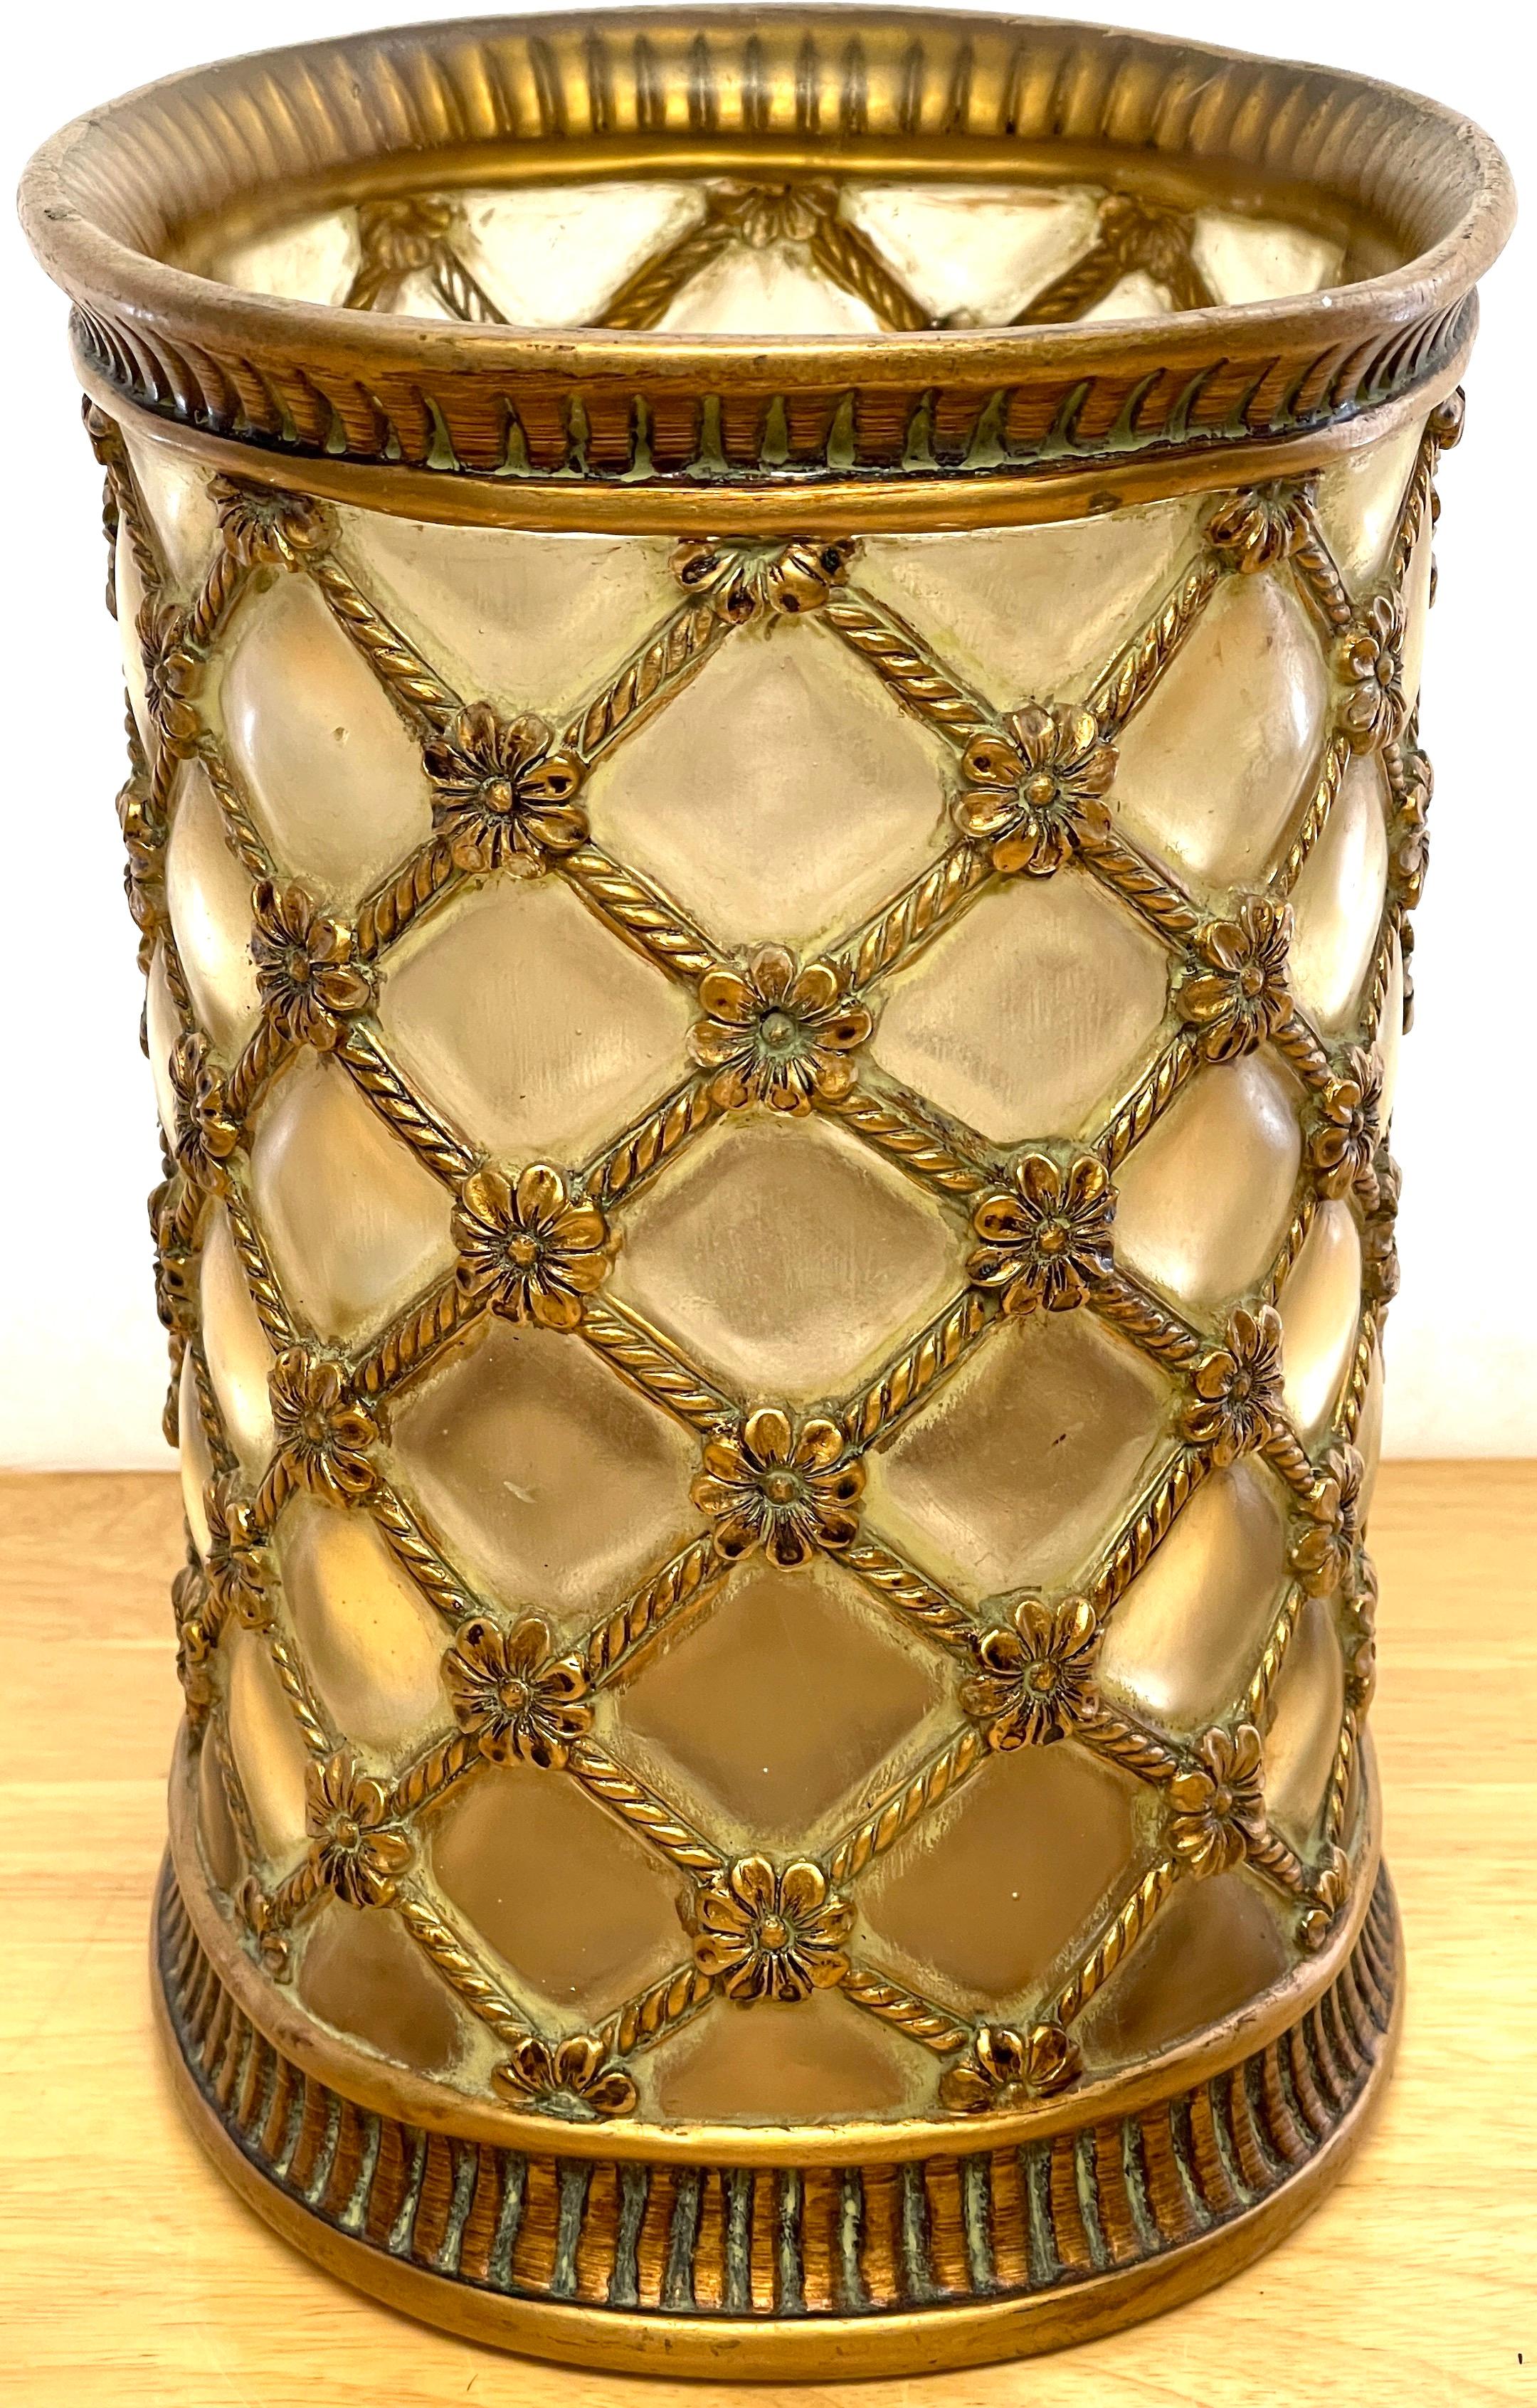 20th Century Hollywood Regency Gilt & Frosted Lucite Wastepaper Basket / Trash Can